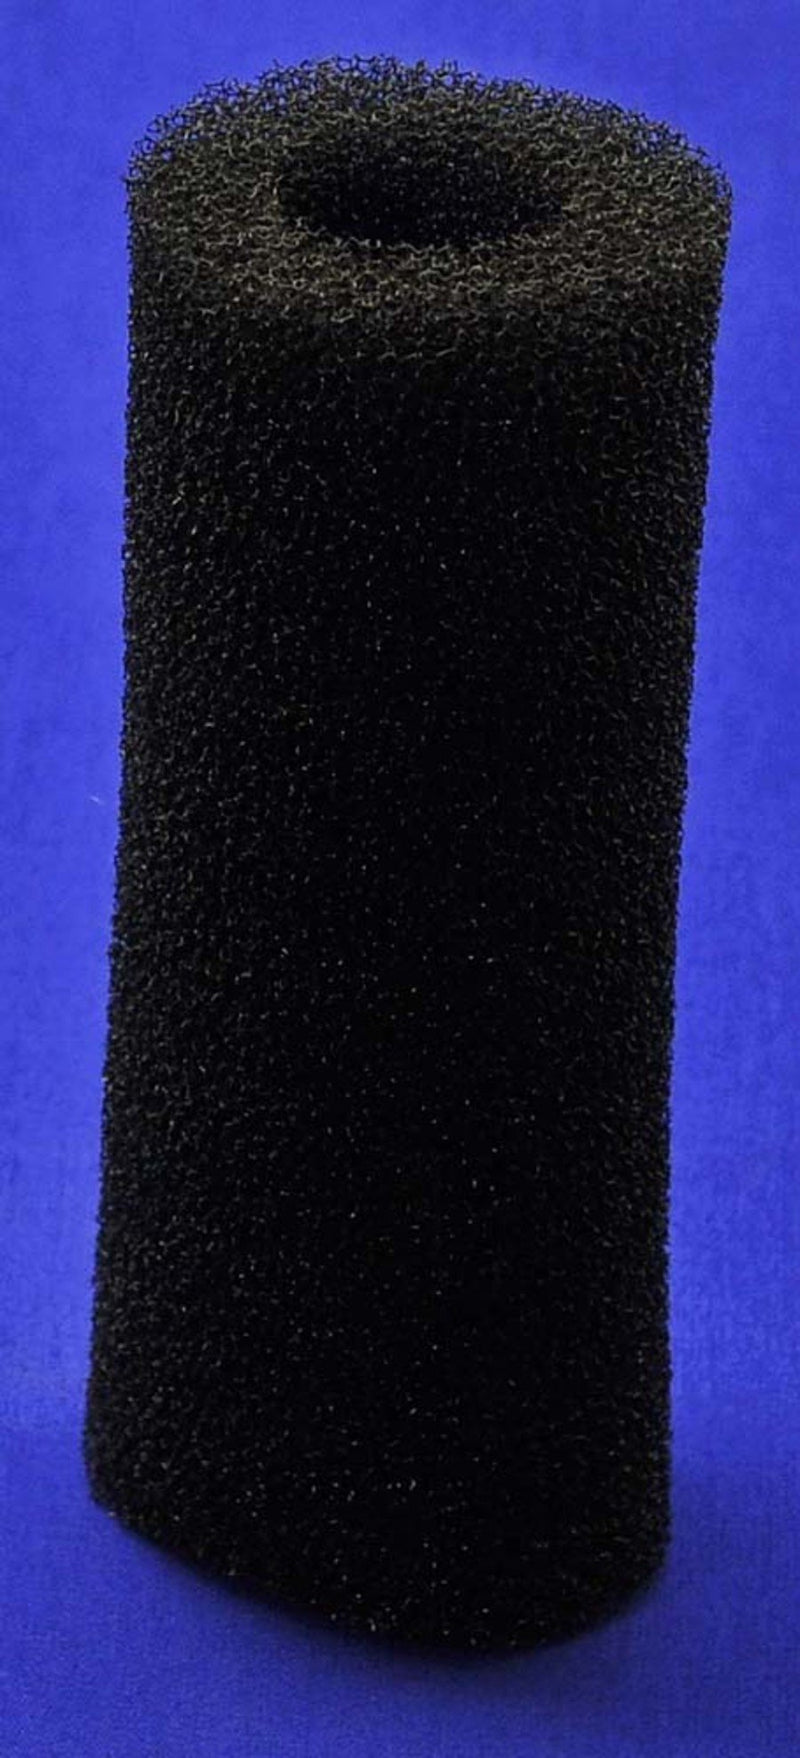 Eshopps Replacement Filter Foam for Filters Black Small, Round - Kwik Pets